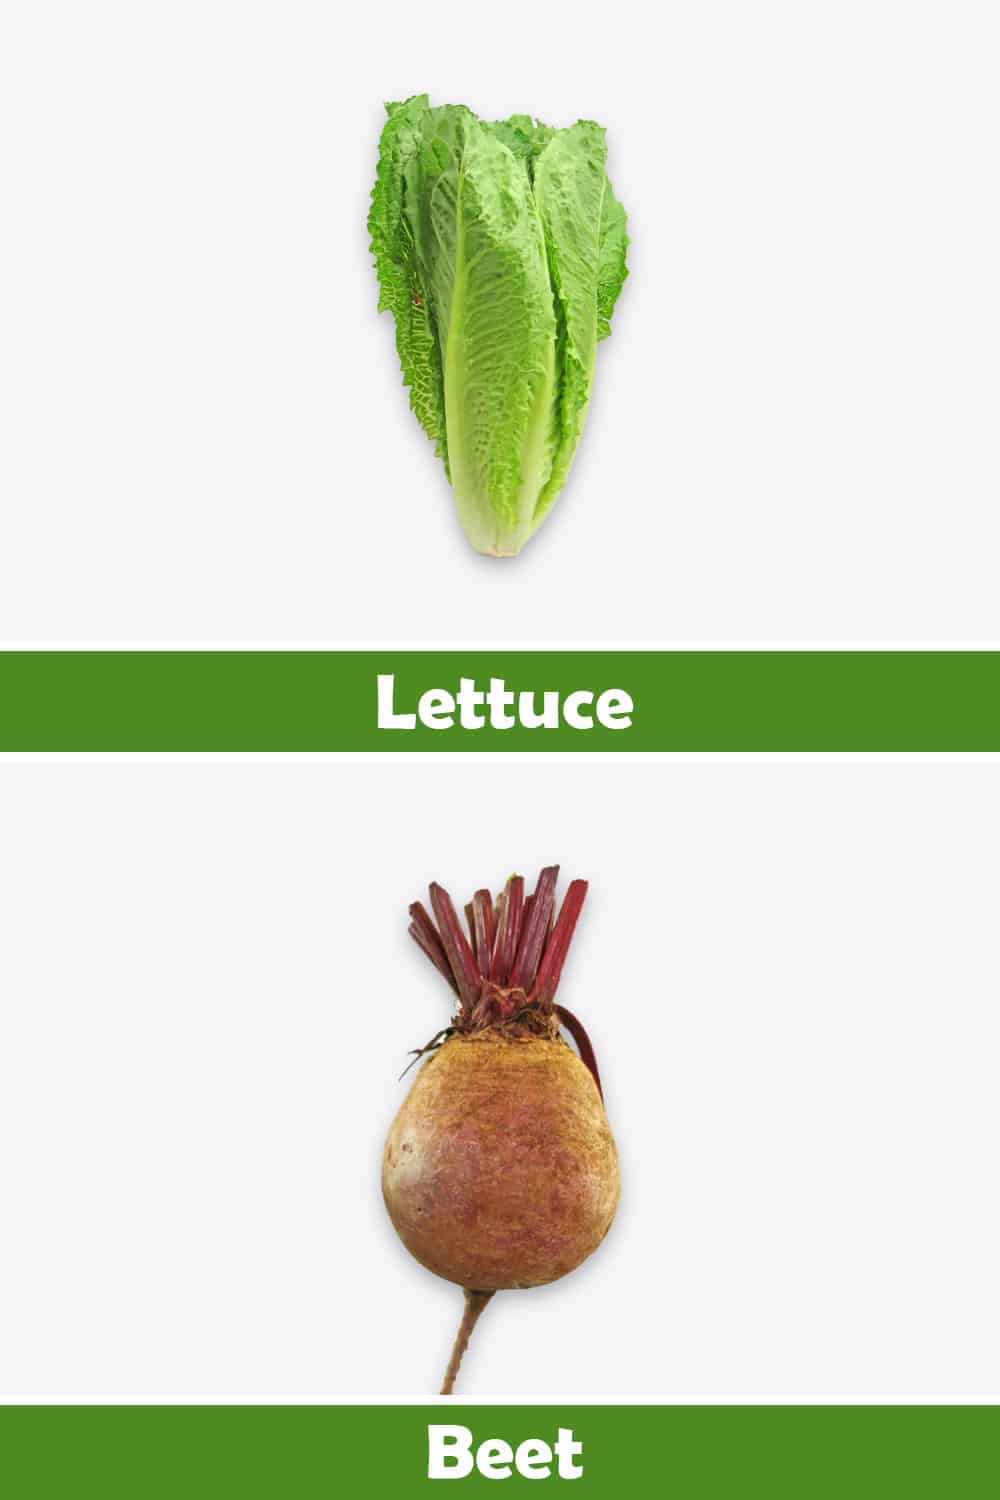 LETTUCE AND BEET